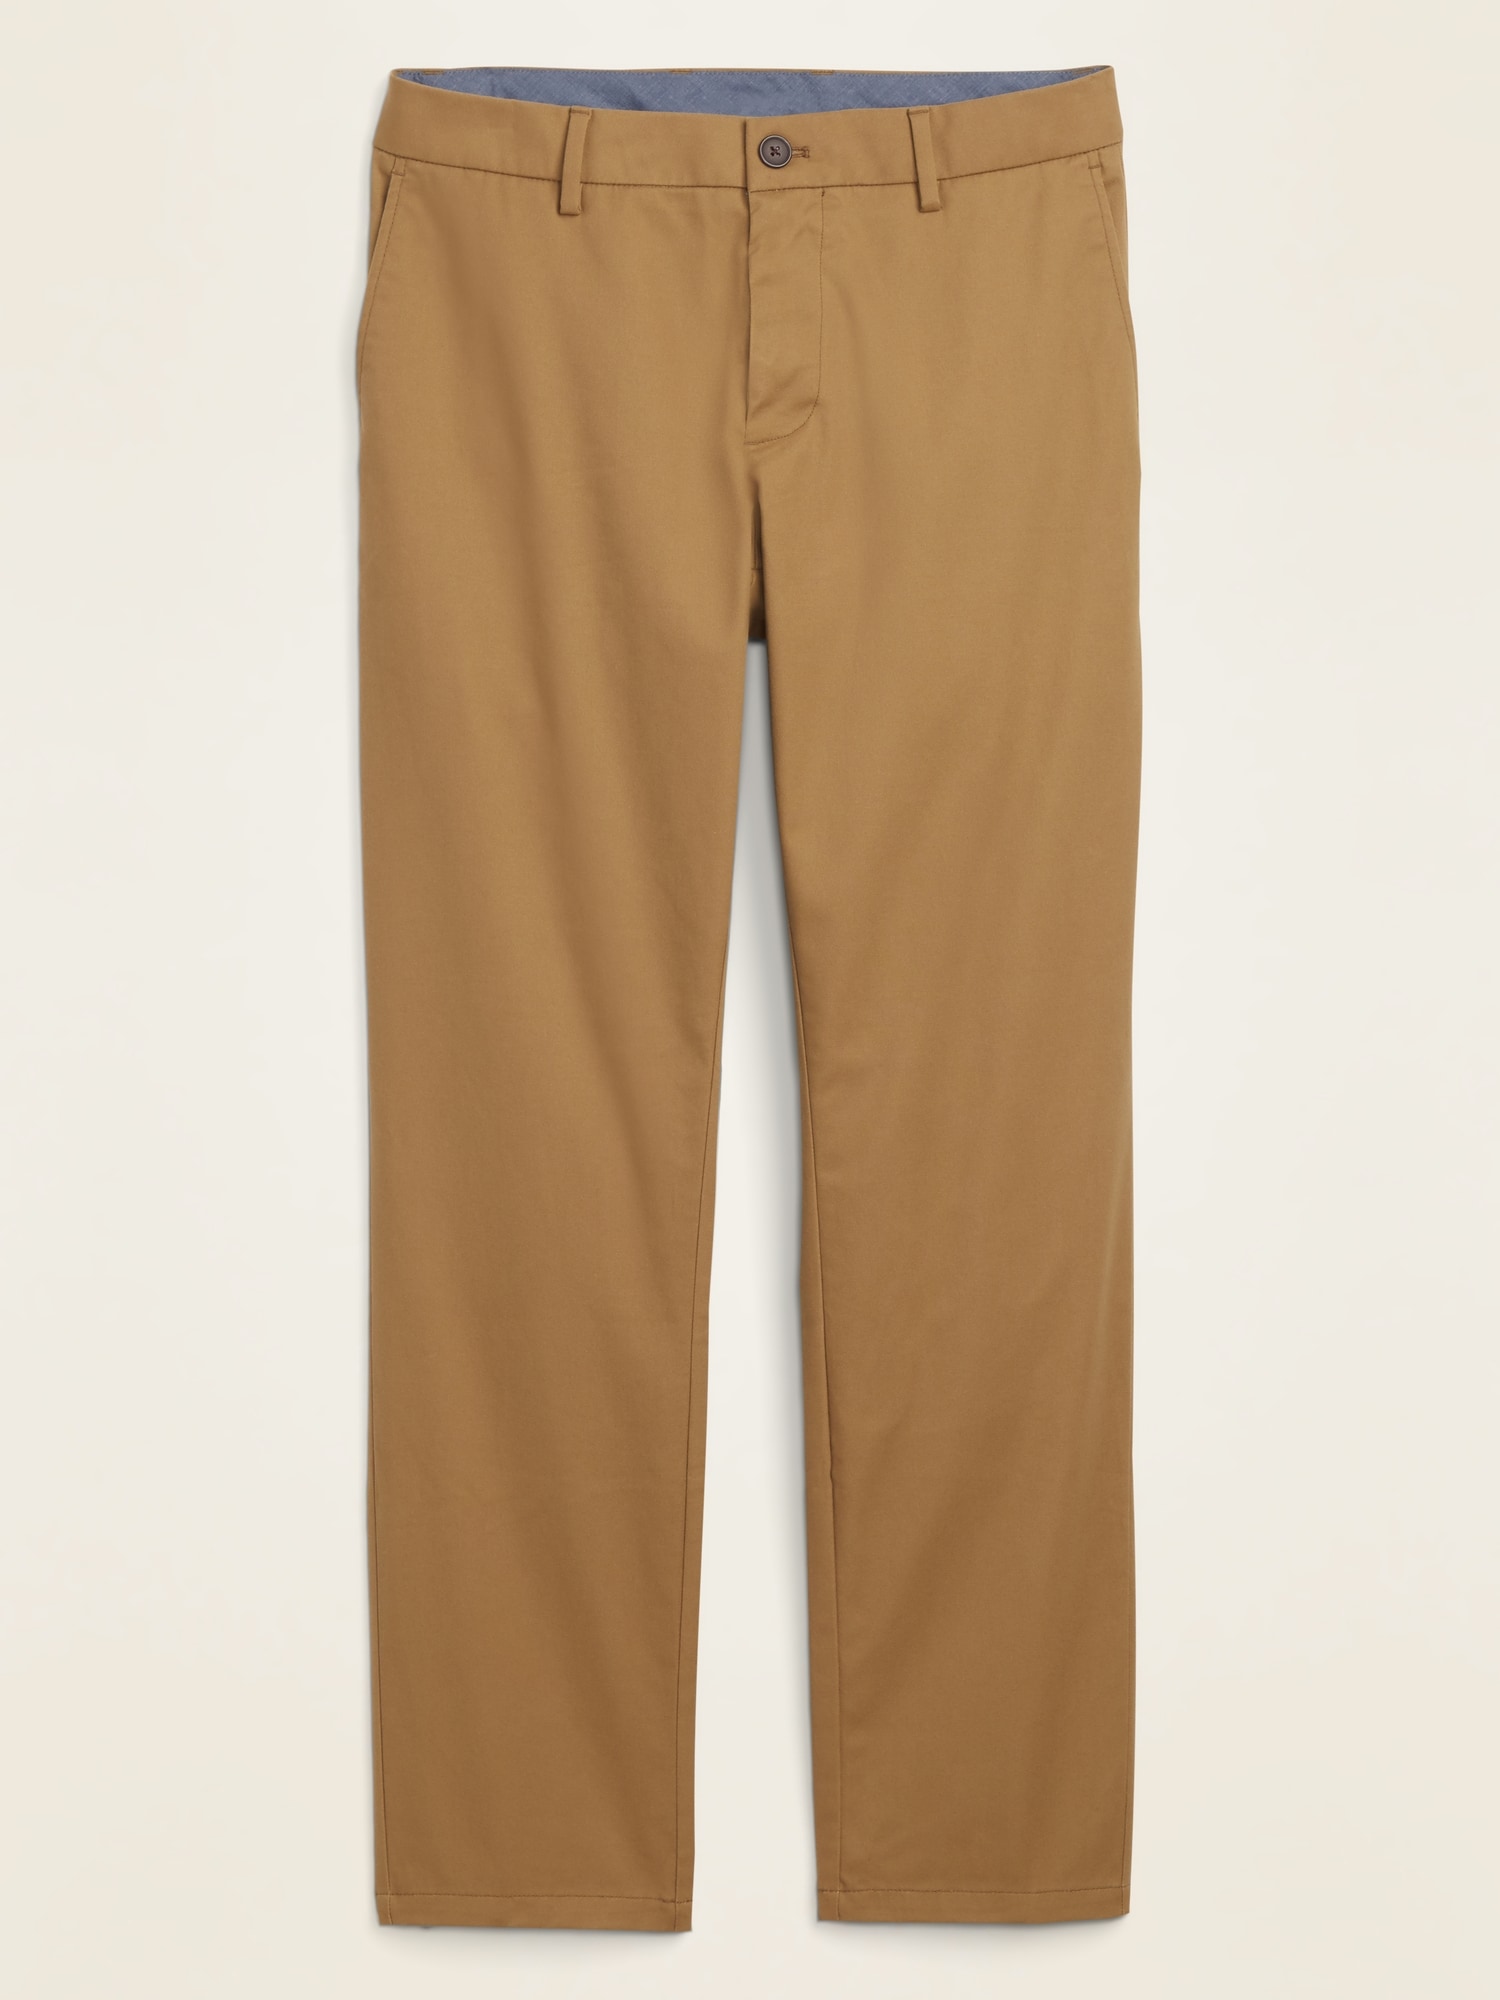 Aggregate more than 84 old navy trousers best - in.cdgdbentre